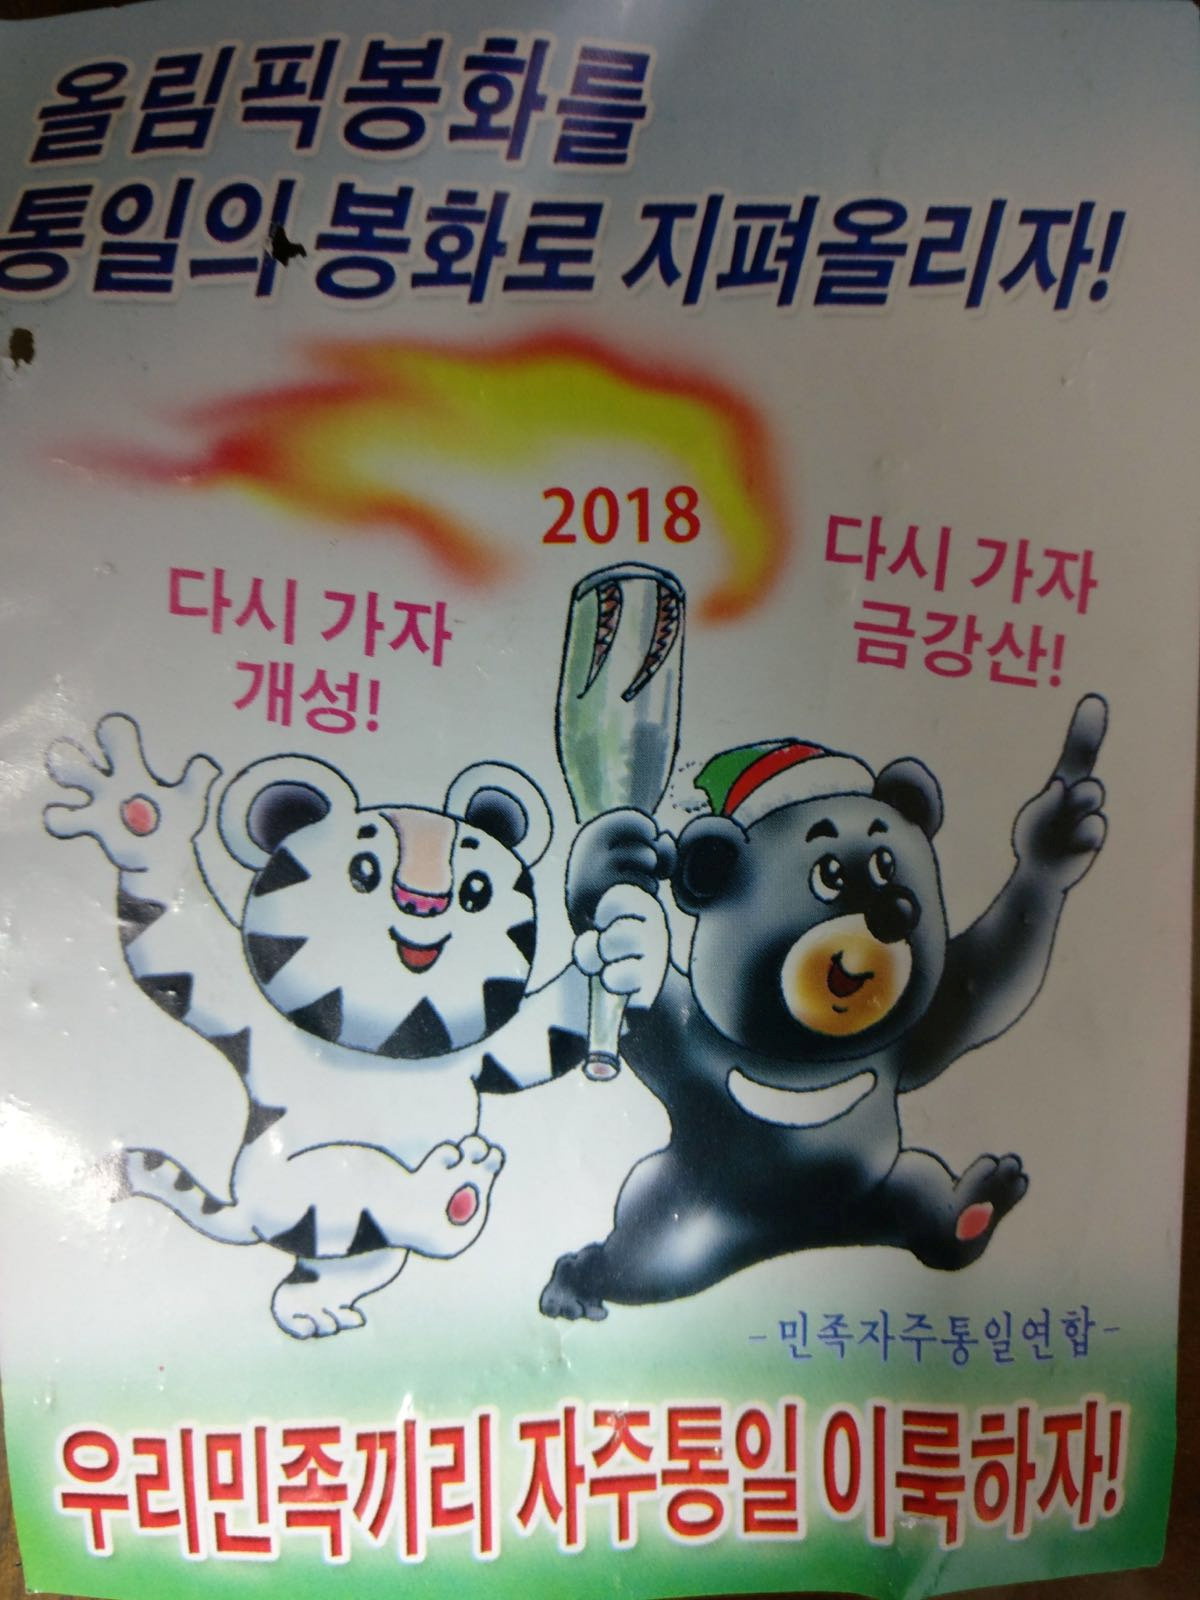 A propaganda flier from North Korea marking the start of the 2018 Winter Olympics that was found in Seoul